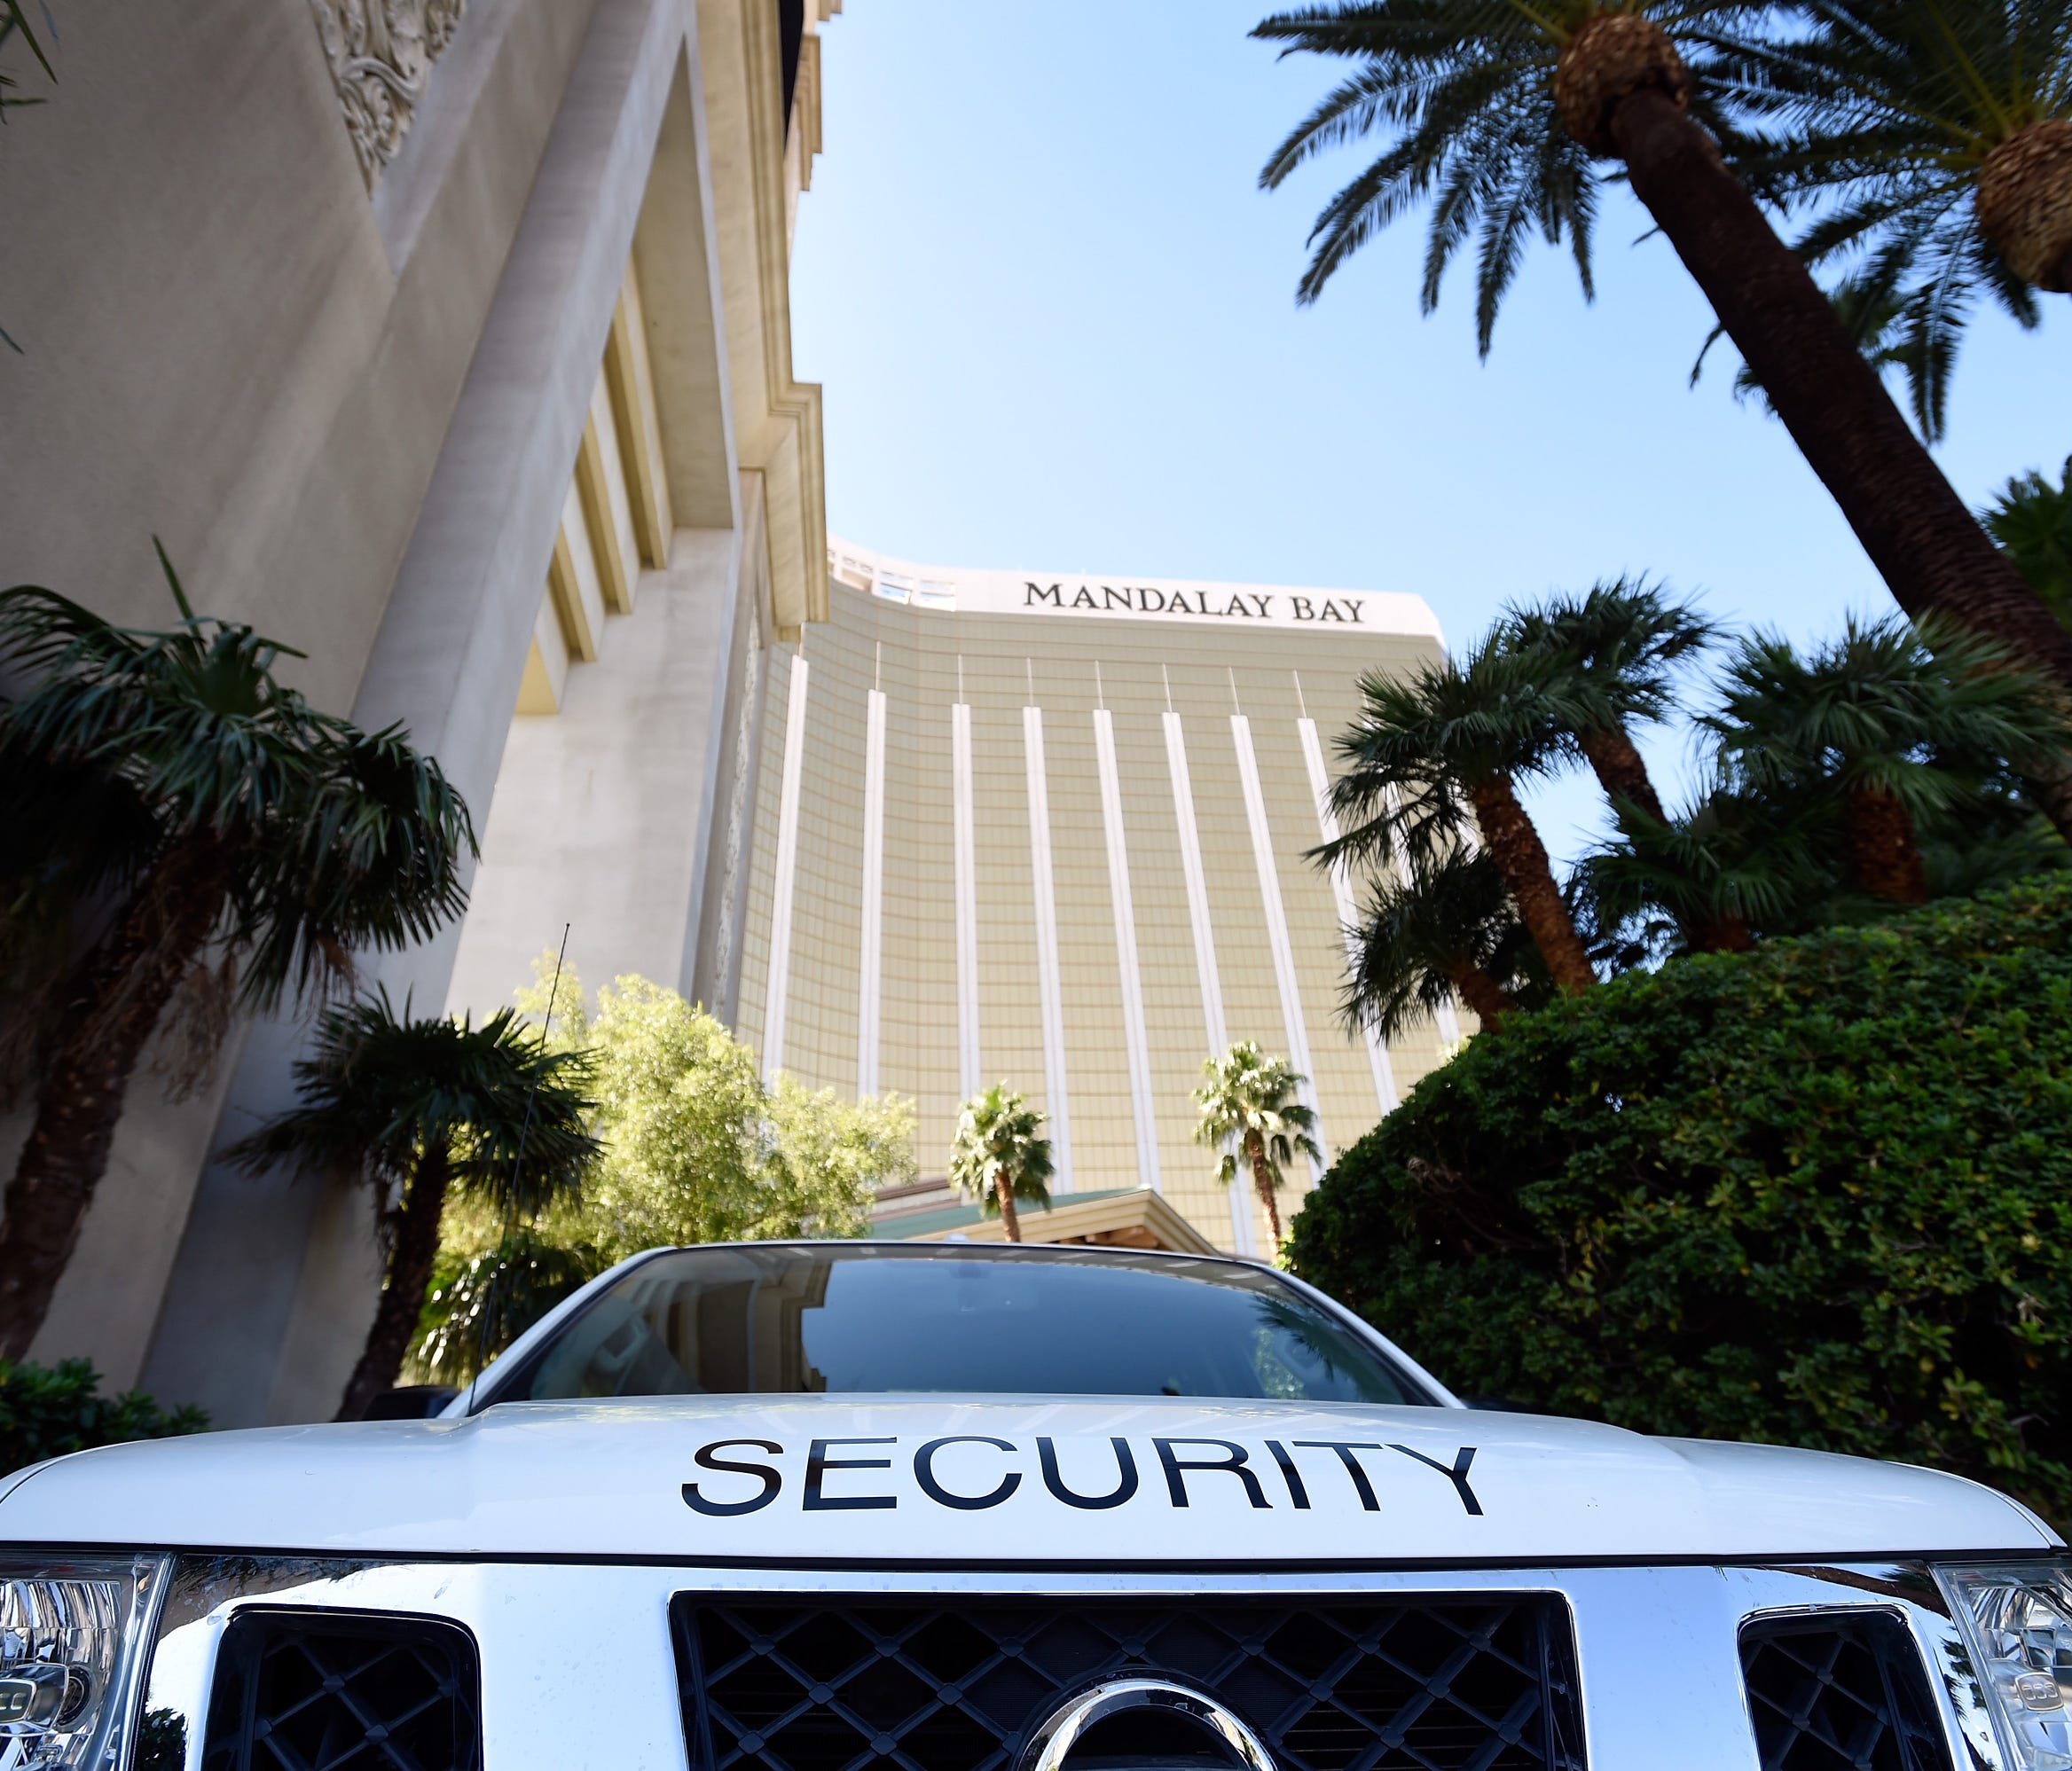 Security experts say hotels should be discreet about specific security measures to avoid tipping off prospective assailants.